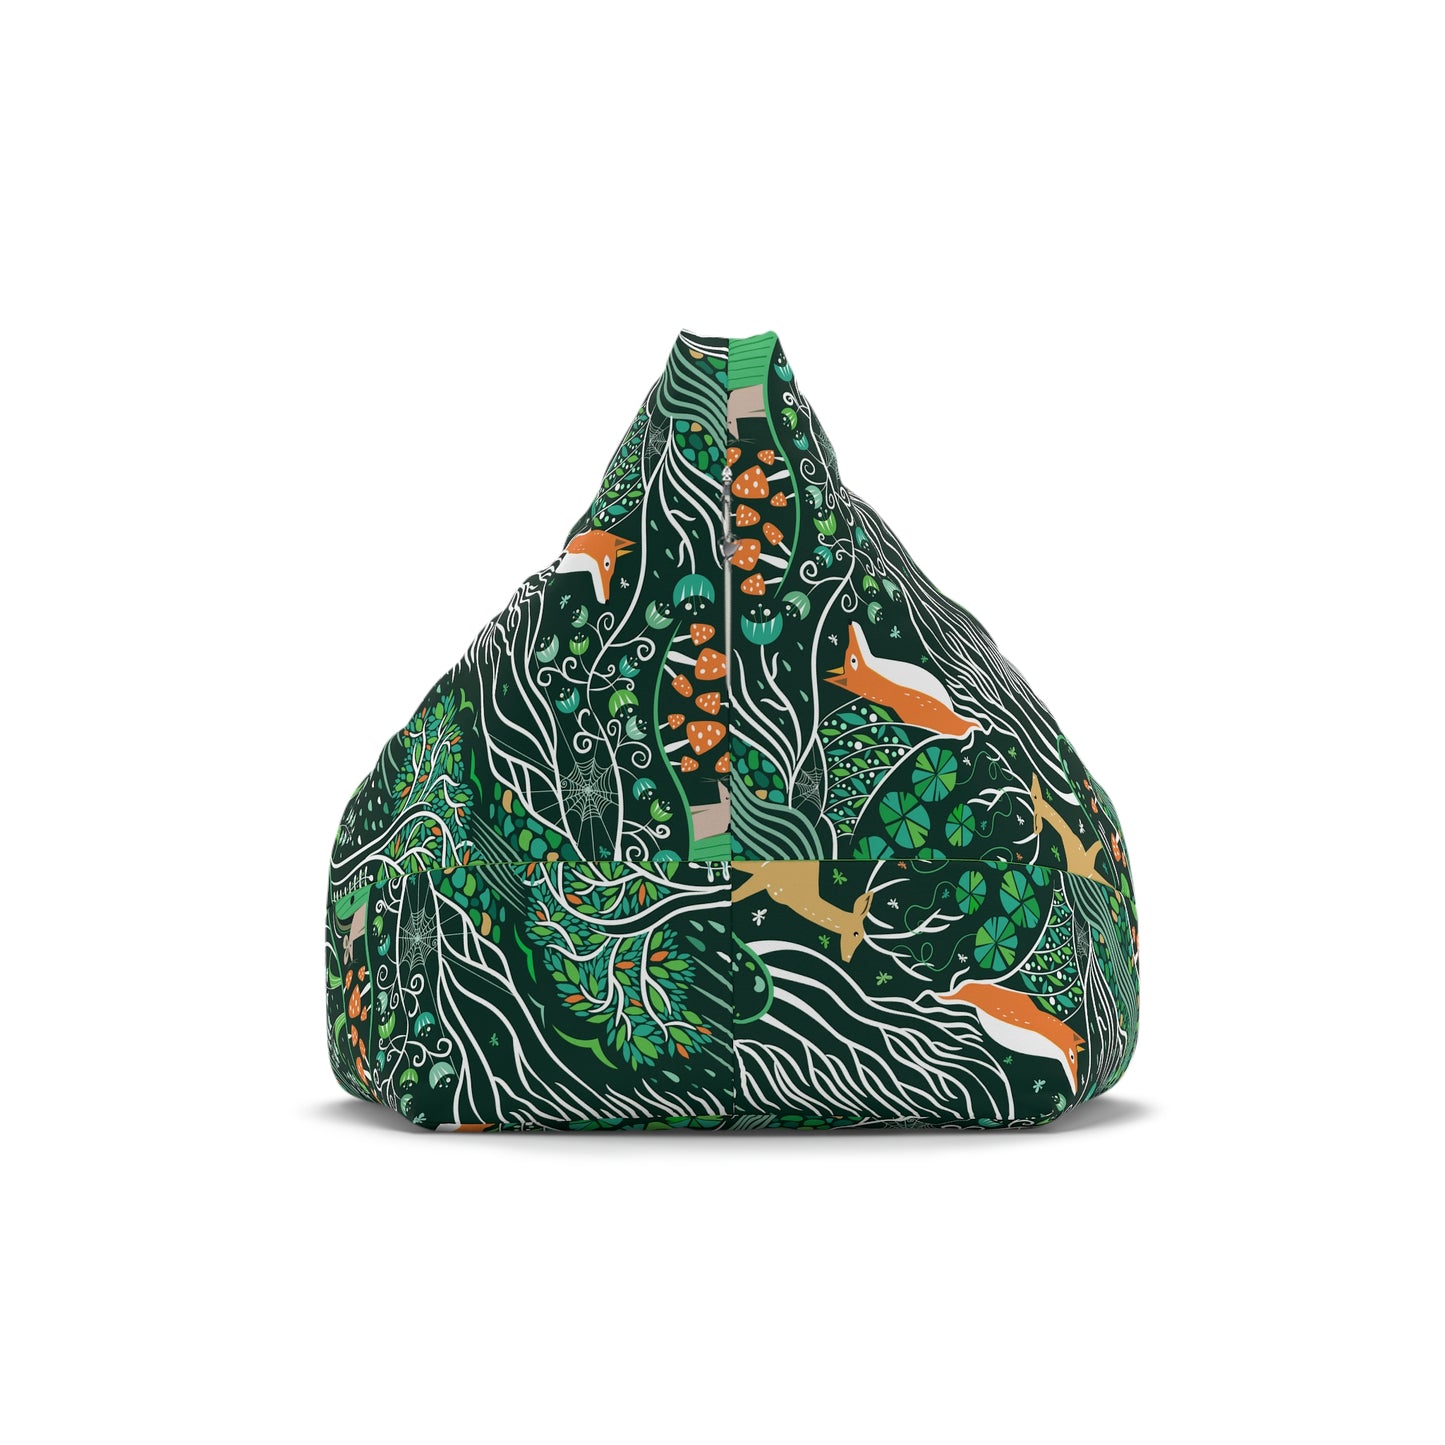 Emerald Forest Bean Bag Chair Cover